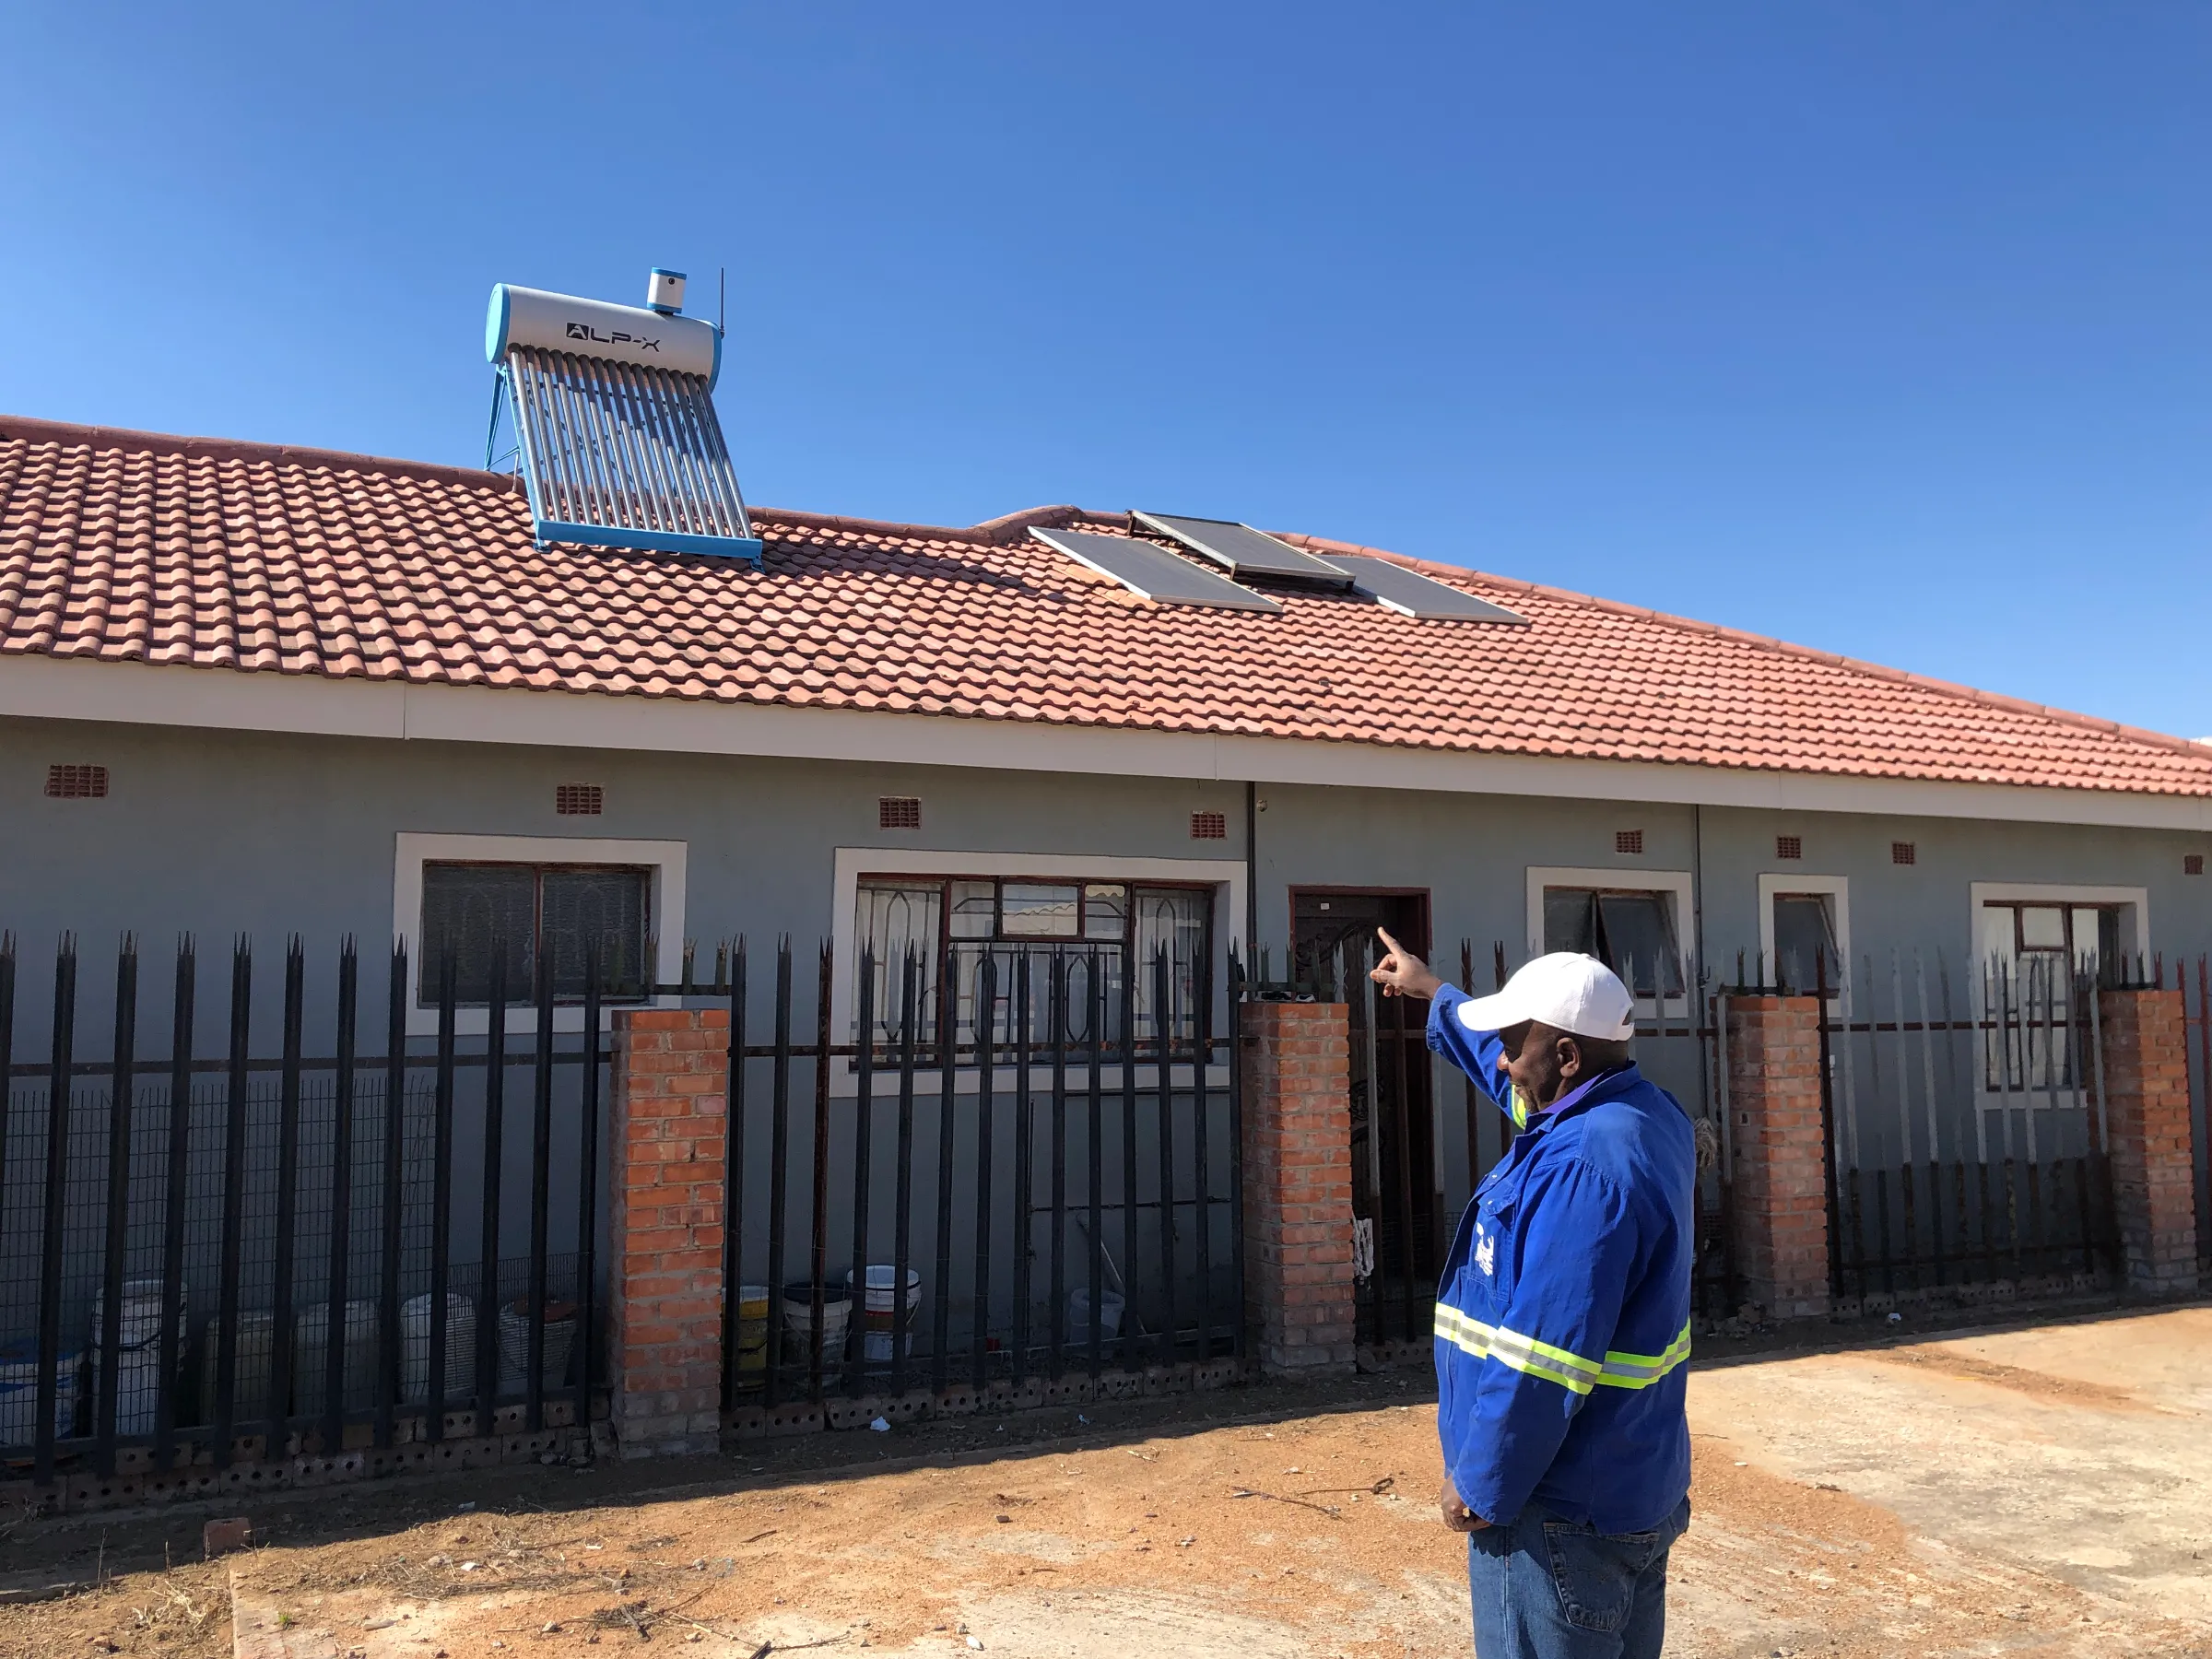 A man points at a building which has a solar heater and panels on the roof